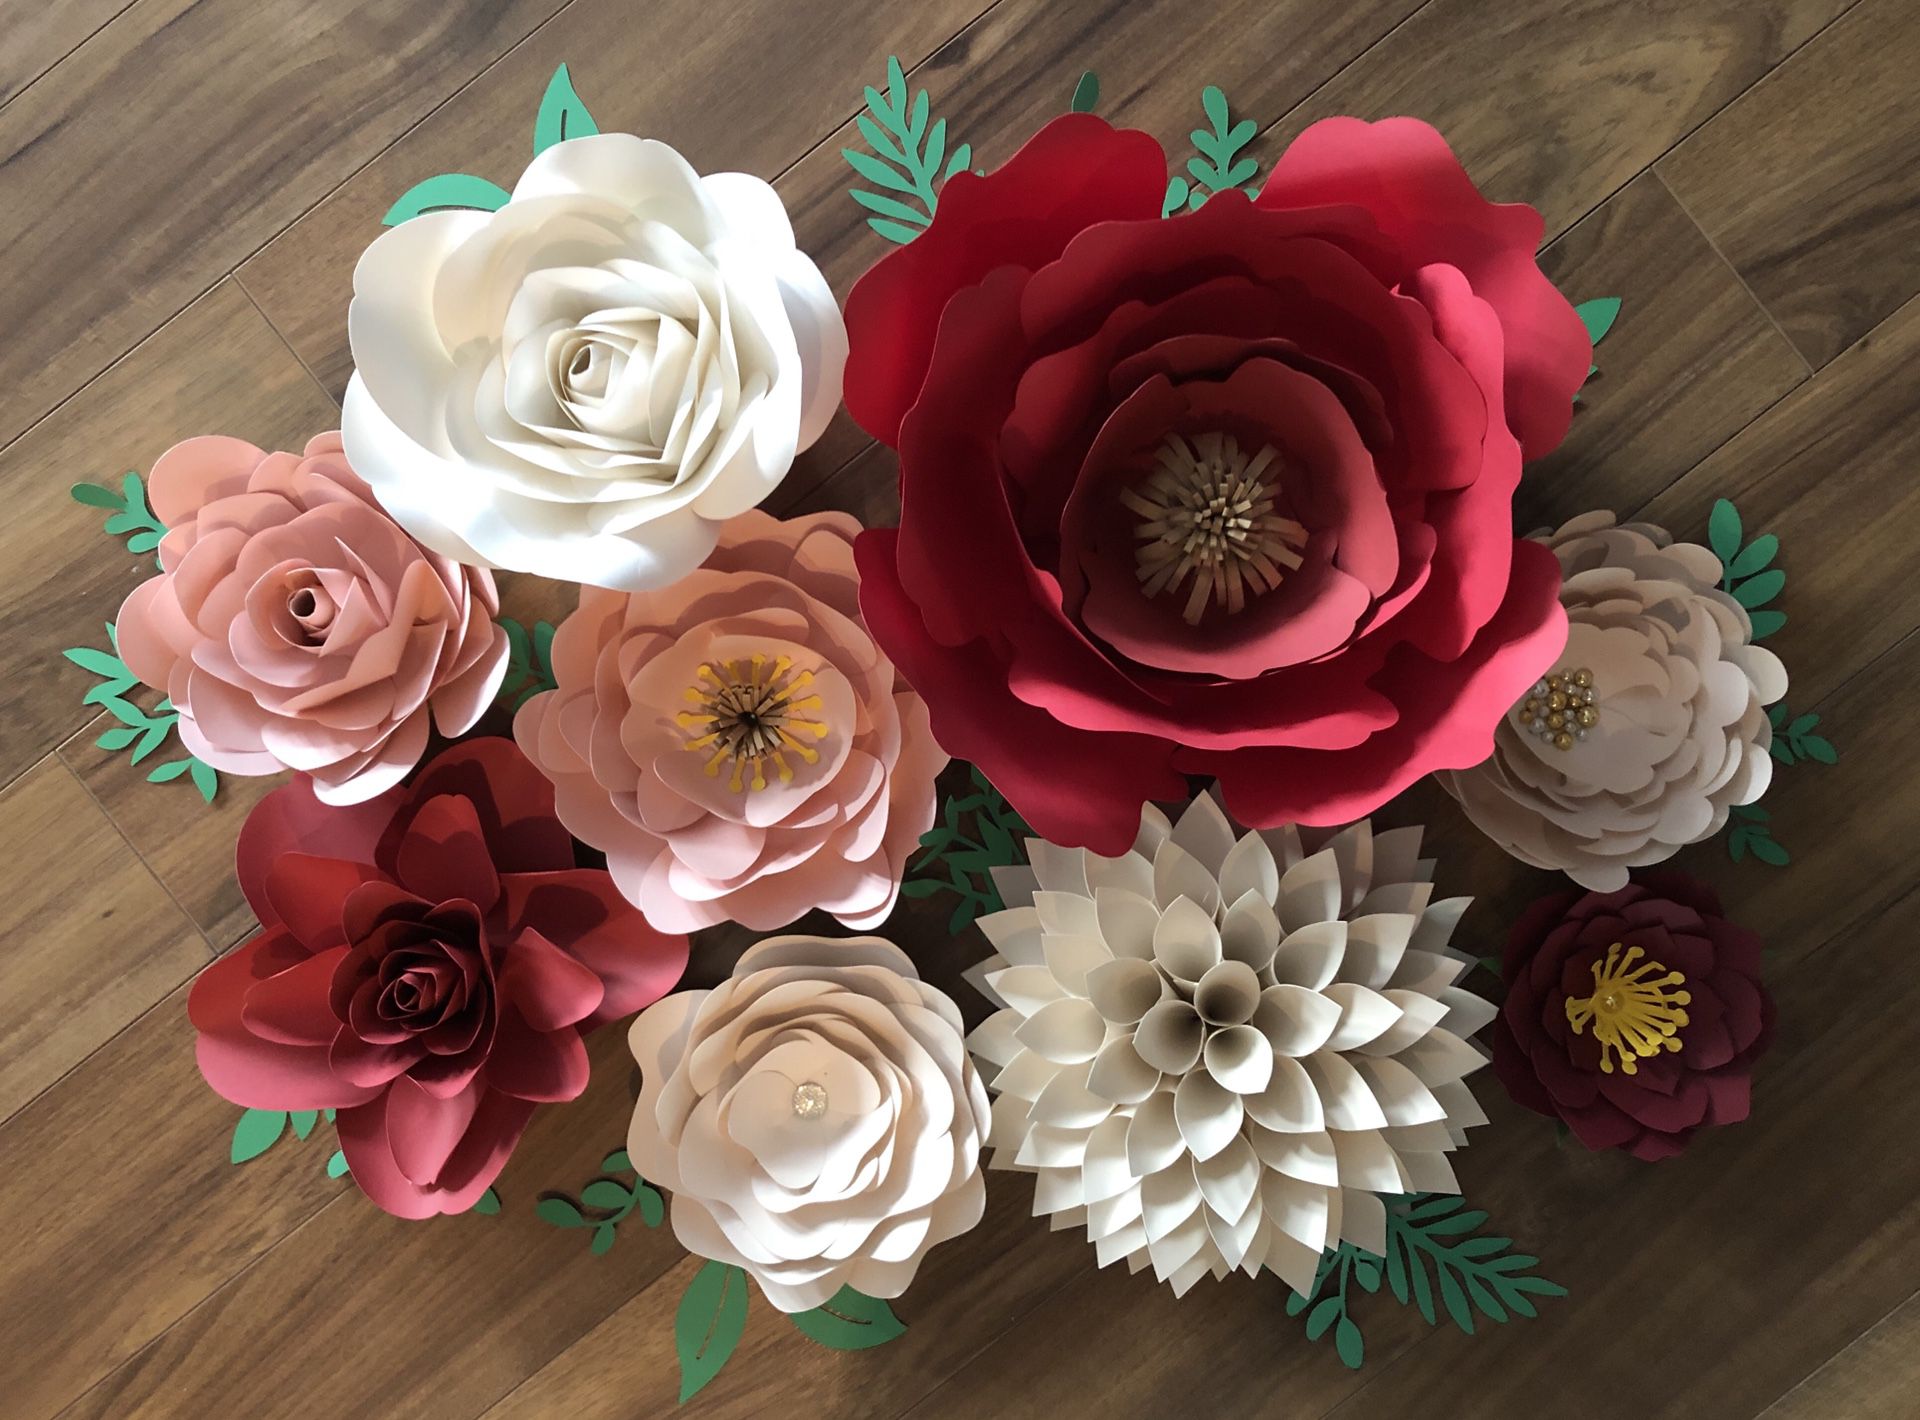 Handcrafted paper flowers - wedding flowers- bridal flowers- baby shower- Mother’s Day